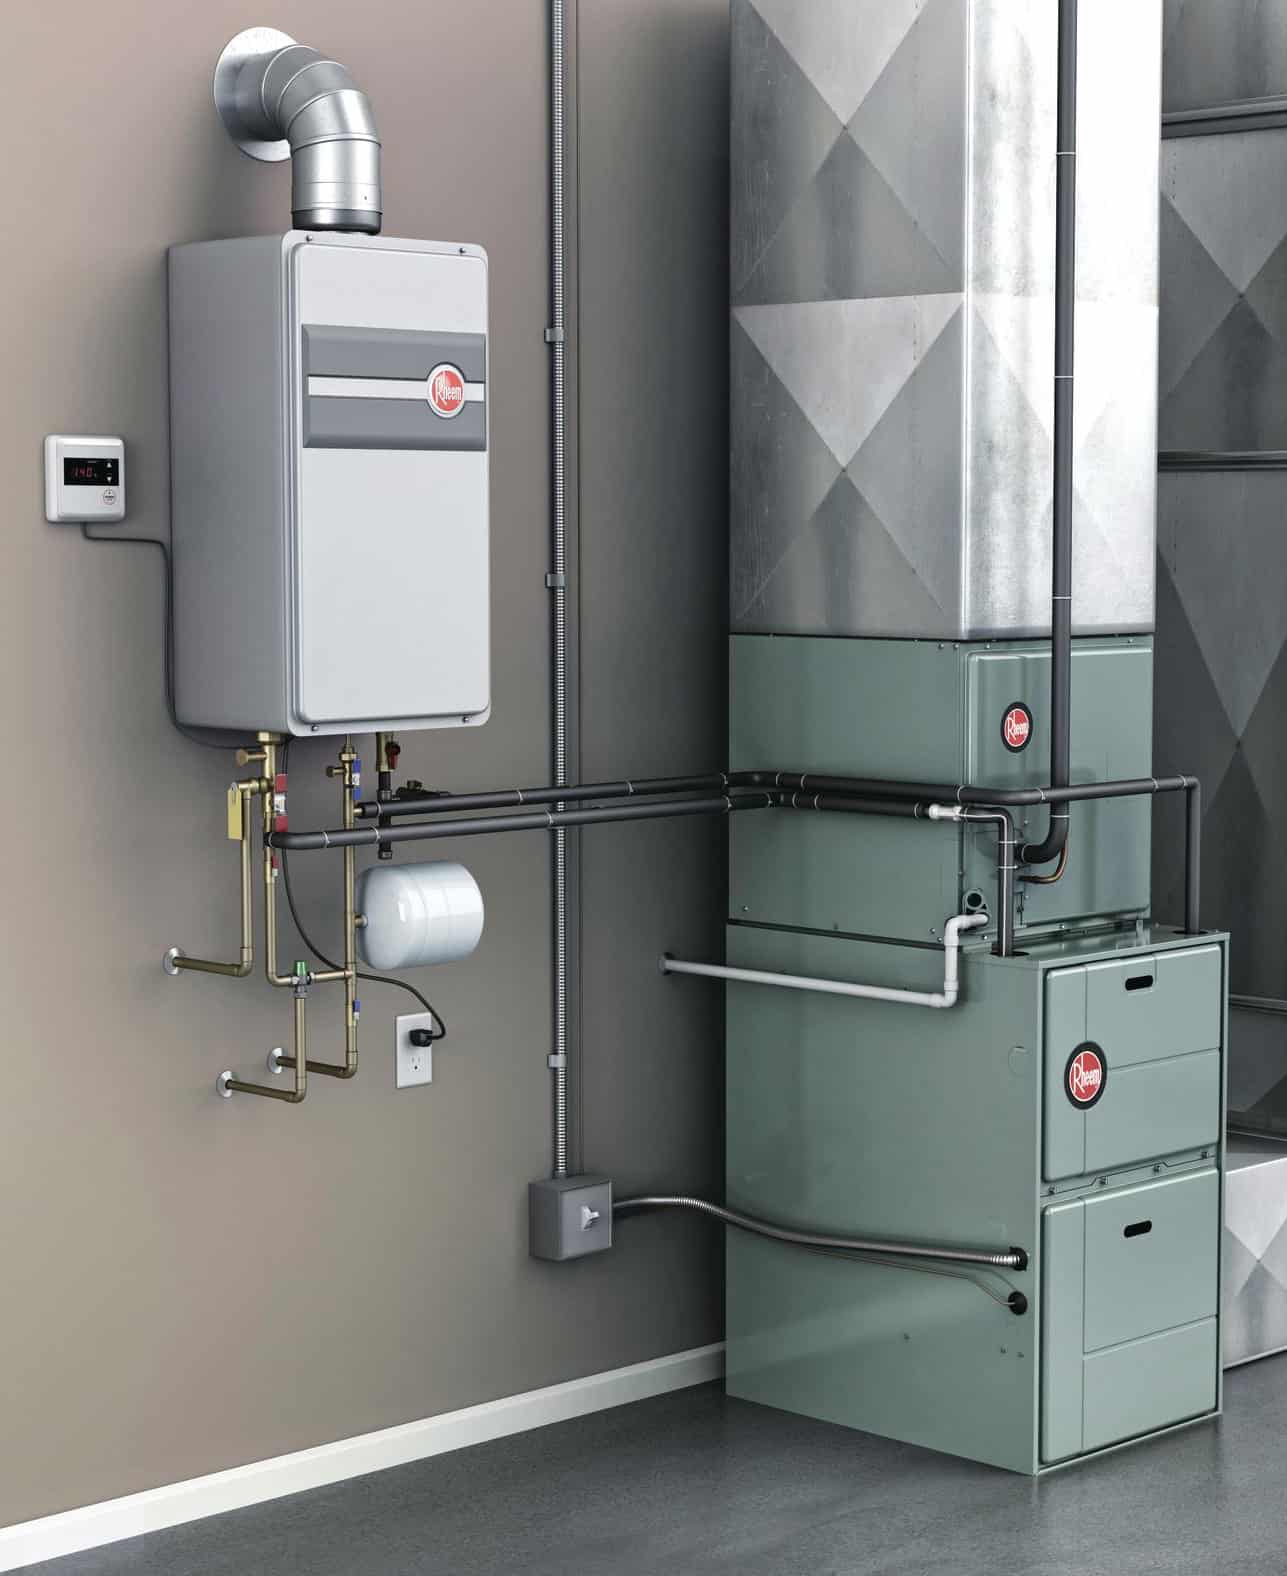 How Long Does It Take For A Heat Pump Water Heater To Heat Up